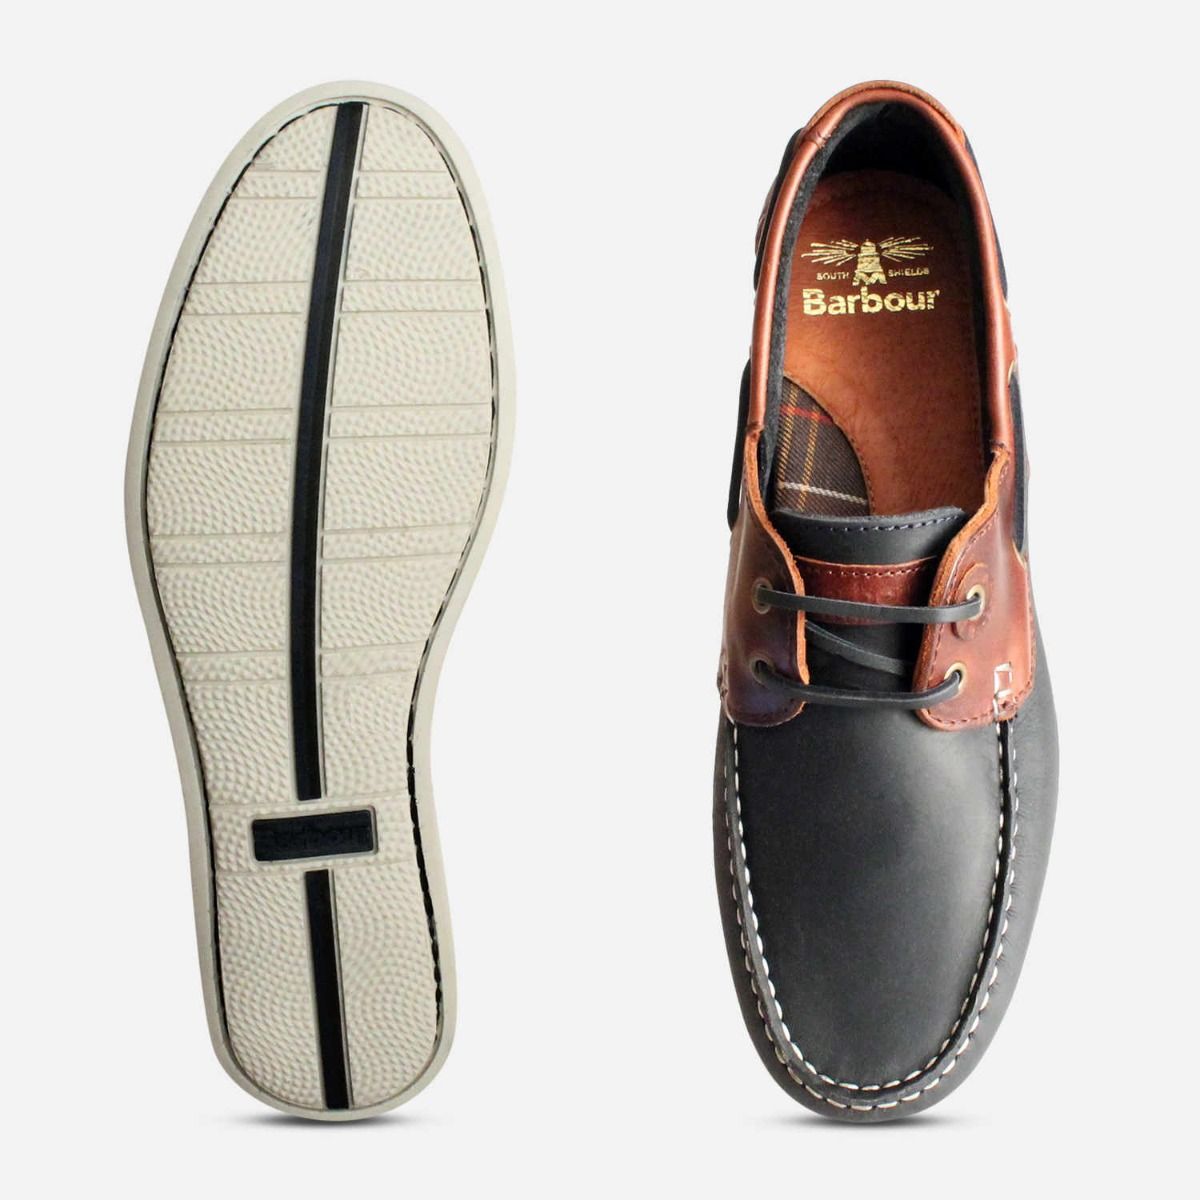 Classic Barbour Capstan Boat Shoes in 